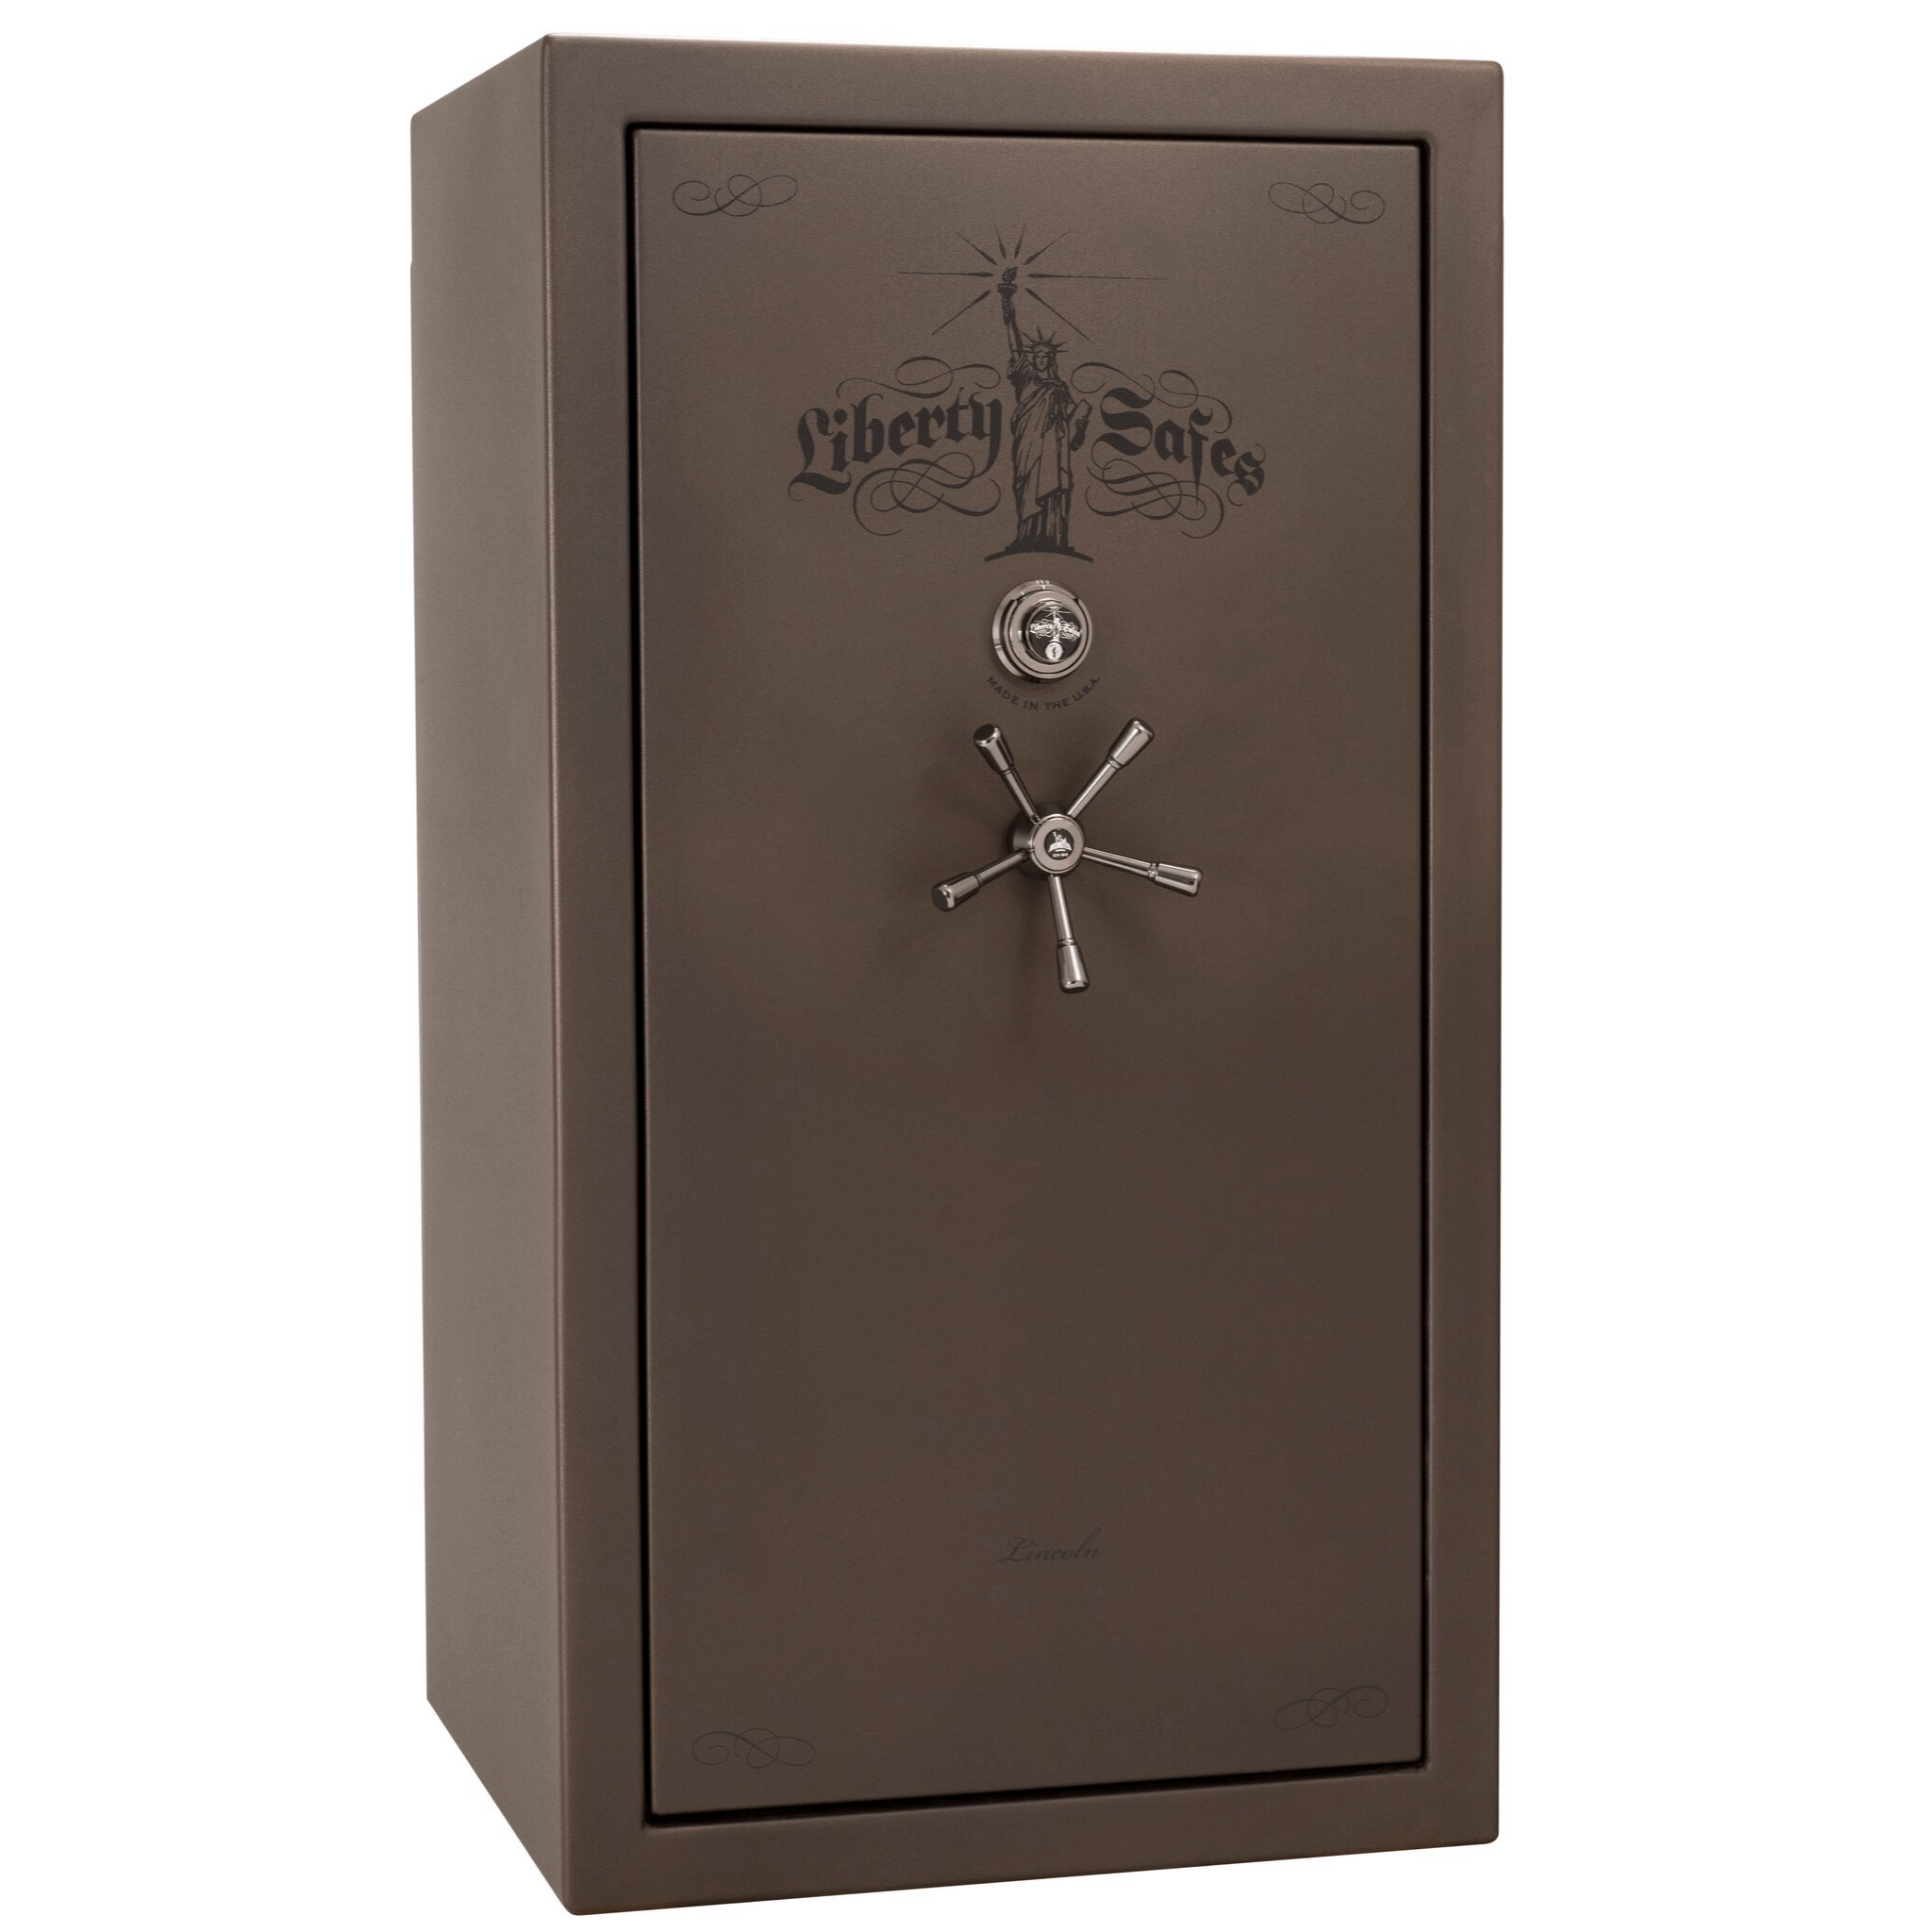 Lincoln Series | Level 5 Security | 110 Minute Fire Protection | 50 | Dimensions: 72.5"(H) x 42"(W) x 32"(D) | Granite Textured | Mechanical Lock, photo 39